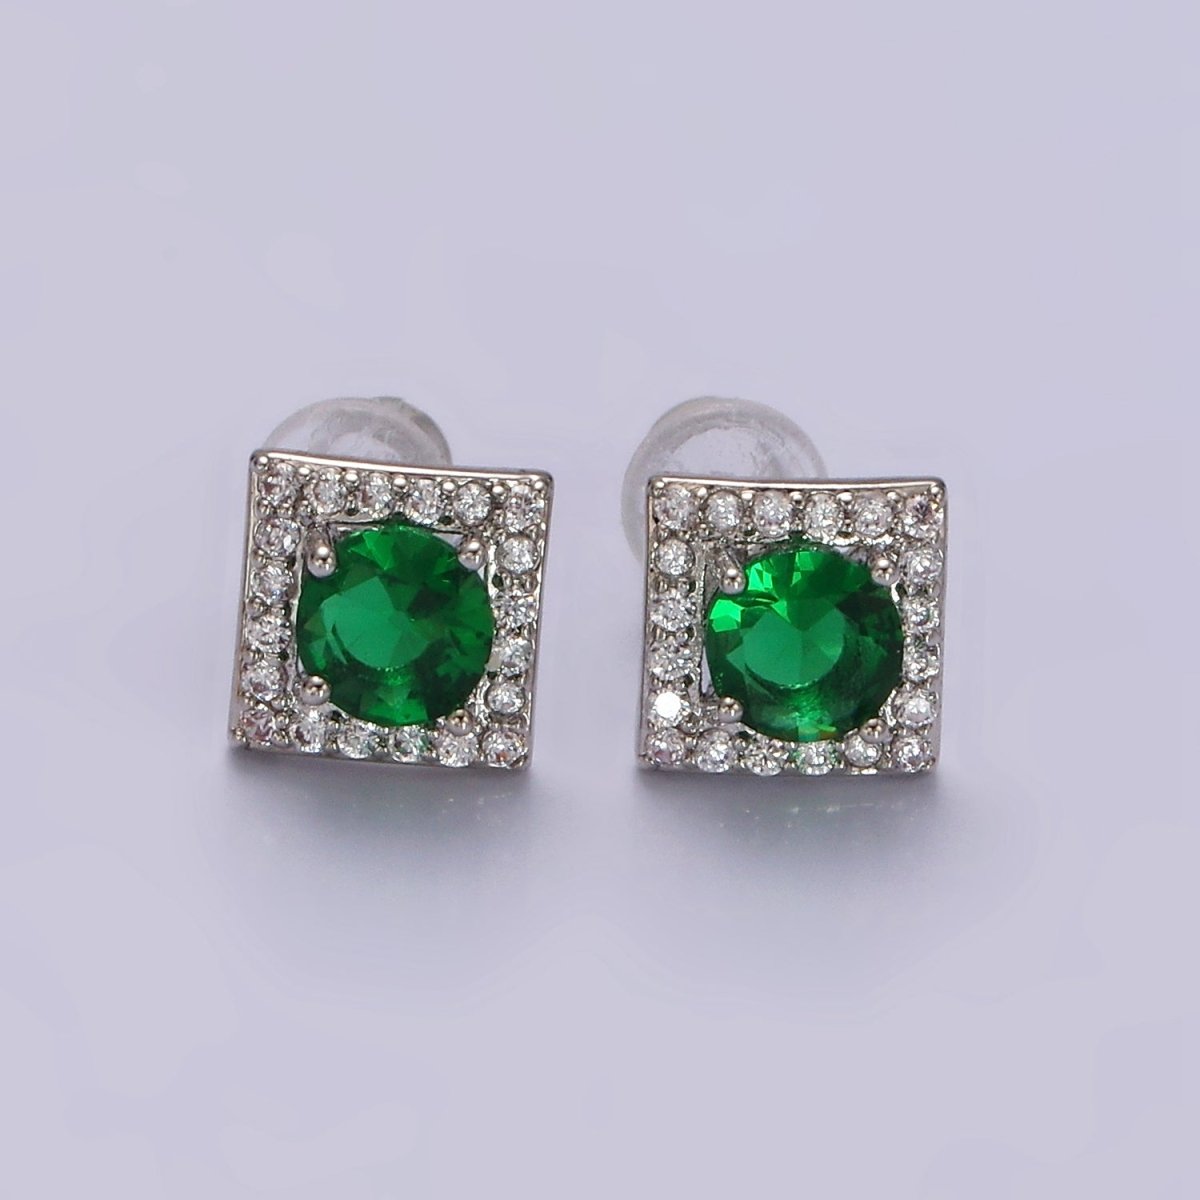 14K Gold Filled Green, Pink, Clear, Blue, Green CZ Micro Paved Square Stud Earrings in Gold & Silver | V320 - V329 - DLUXCA